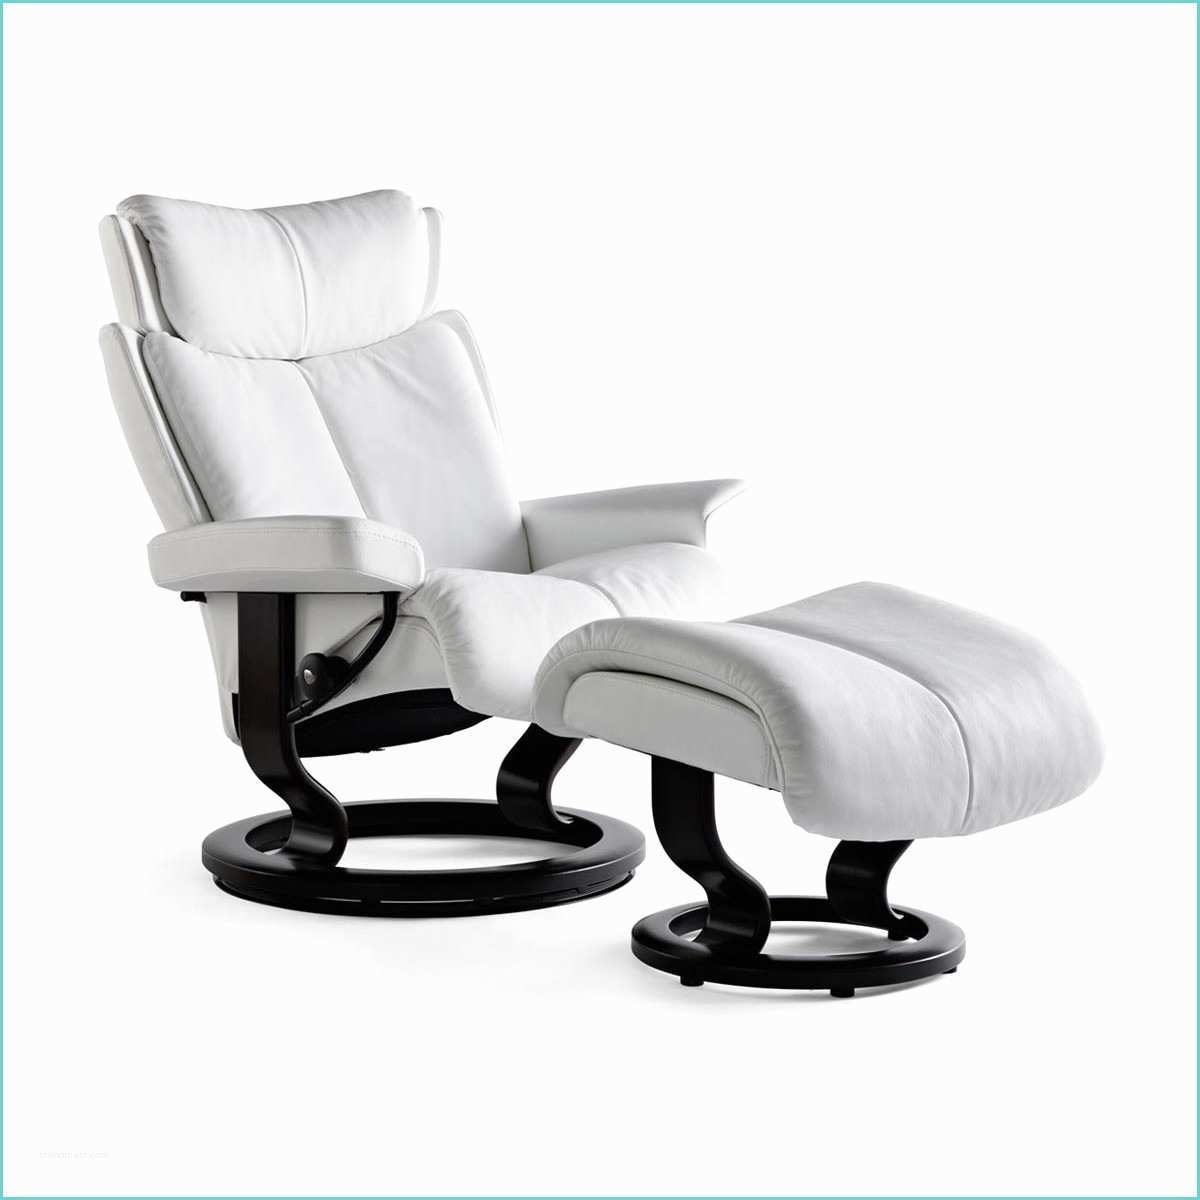 Stressless Magic Chair Review Stressless Magic Small Recliner &amp; Ottoman From $3 295 00